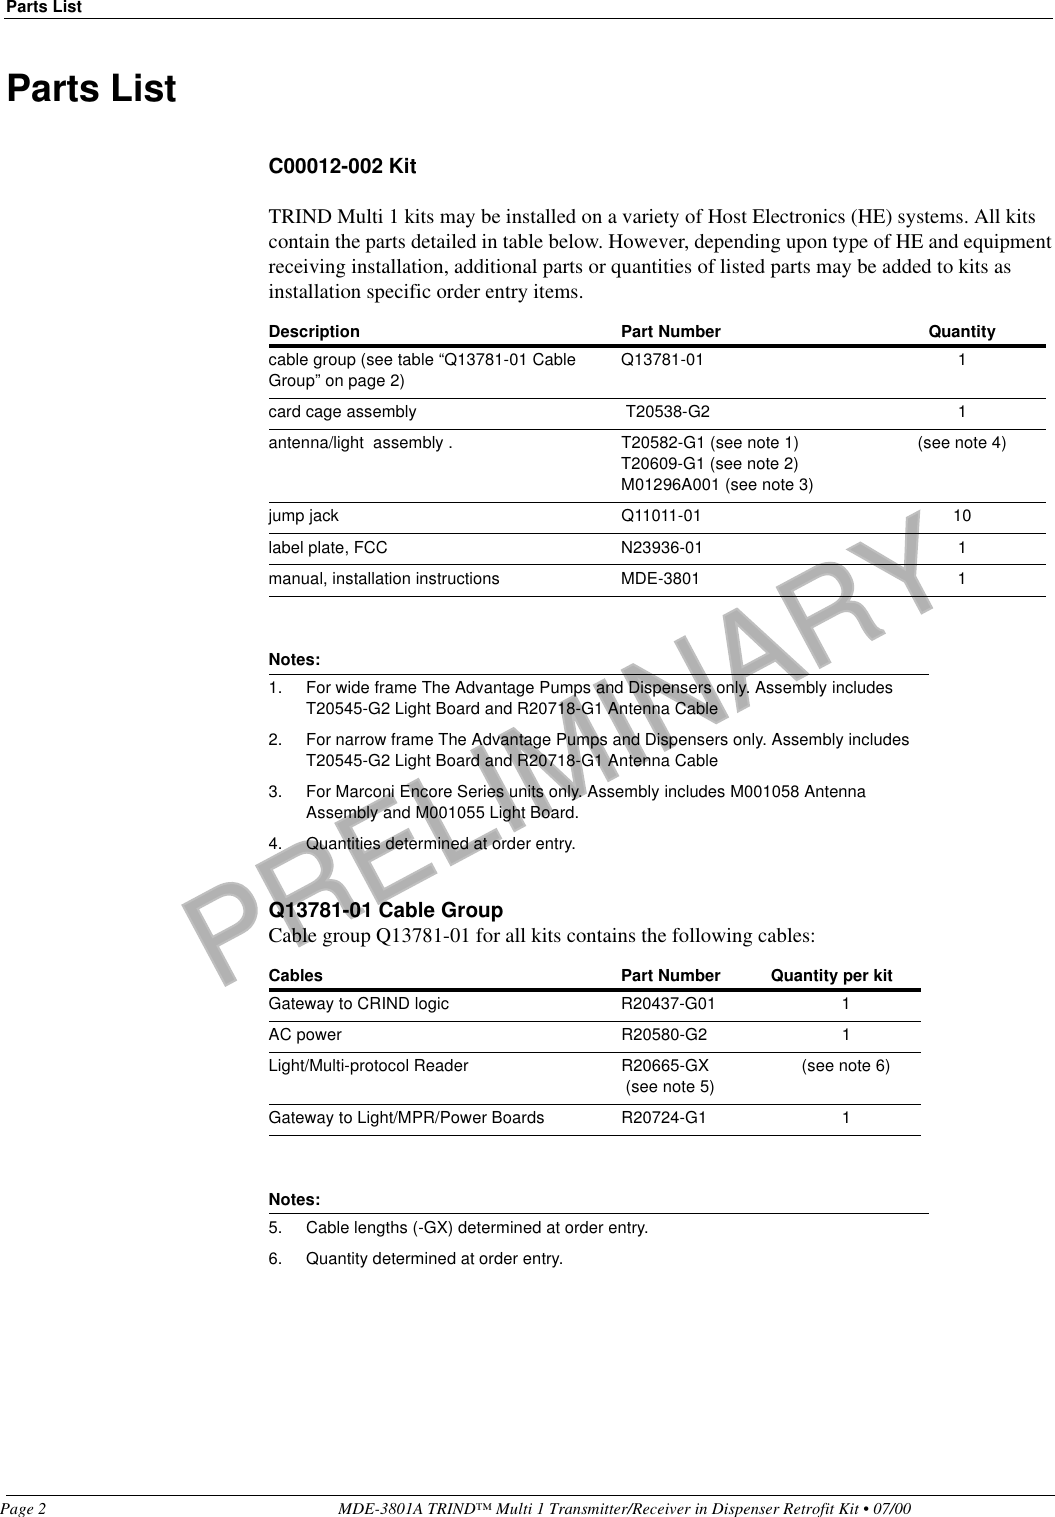 PRELIMINARYParts ListPage 2 MDE-3801A TRIND™ Multi 1 Transmitter/Receiver in Dispenser Retrofit Kit • 07/00Parts ListC00012-002 KitTRIND Multi 1 kits may be installed on a variety of Host Electronics (HE) systems. All kits contain the parts detailed in table below. However, depending upon type of HE and equipment receiving installation, additional parts or quantities of listed parts may be added to kits as installation specific order entry items. Q13781-01 Cable Group Cable group Q13781-01 for all kits contains the following cables:Description Part Number Quantitycable group (see table “Q13781-01 Cable Group” on page 2)Q13781-01 1card cage assembly  T20538-G2 1antenna/light  assembly . T20582-G1 (see note 1)T20609-G1 (see note 2)M01296A001 (see note 3)(see note 4)jump jack Q11011-01 10label plate, FCC N23936-01 1manual, installation instructions MDE-3801 1Notes:1. For wide frame The Advantage Pumps and Dispensers only. Assembly includes T20545-G2 Light Board and R20718-G1 Antenna Cable2. For narrow frame The Advantage Pumps and Dispensers only. Assembly includes T20545-G2 Light Board and R20718-G1 Antenna Cable3. For Marconi Encore Series units only. Assembly includes M001058 Antenna Assembly and M001055 Light Board. 4. Quantities determined at order entry.Cables Part Number Quantity per kitGateway to CRIND logic R20437-G01 1AC power R20580-G2 1Light/Multi-protocol Reader R20665-GX (see note 5)(see note 6)Gateway to Light/MPR/Power Boards R20724-G1 1Notes:5. Cable lengths (-GX) determined at order entry.6. Quantity determined at order entry.